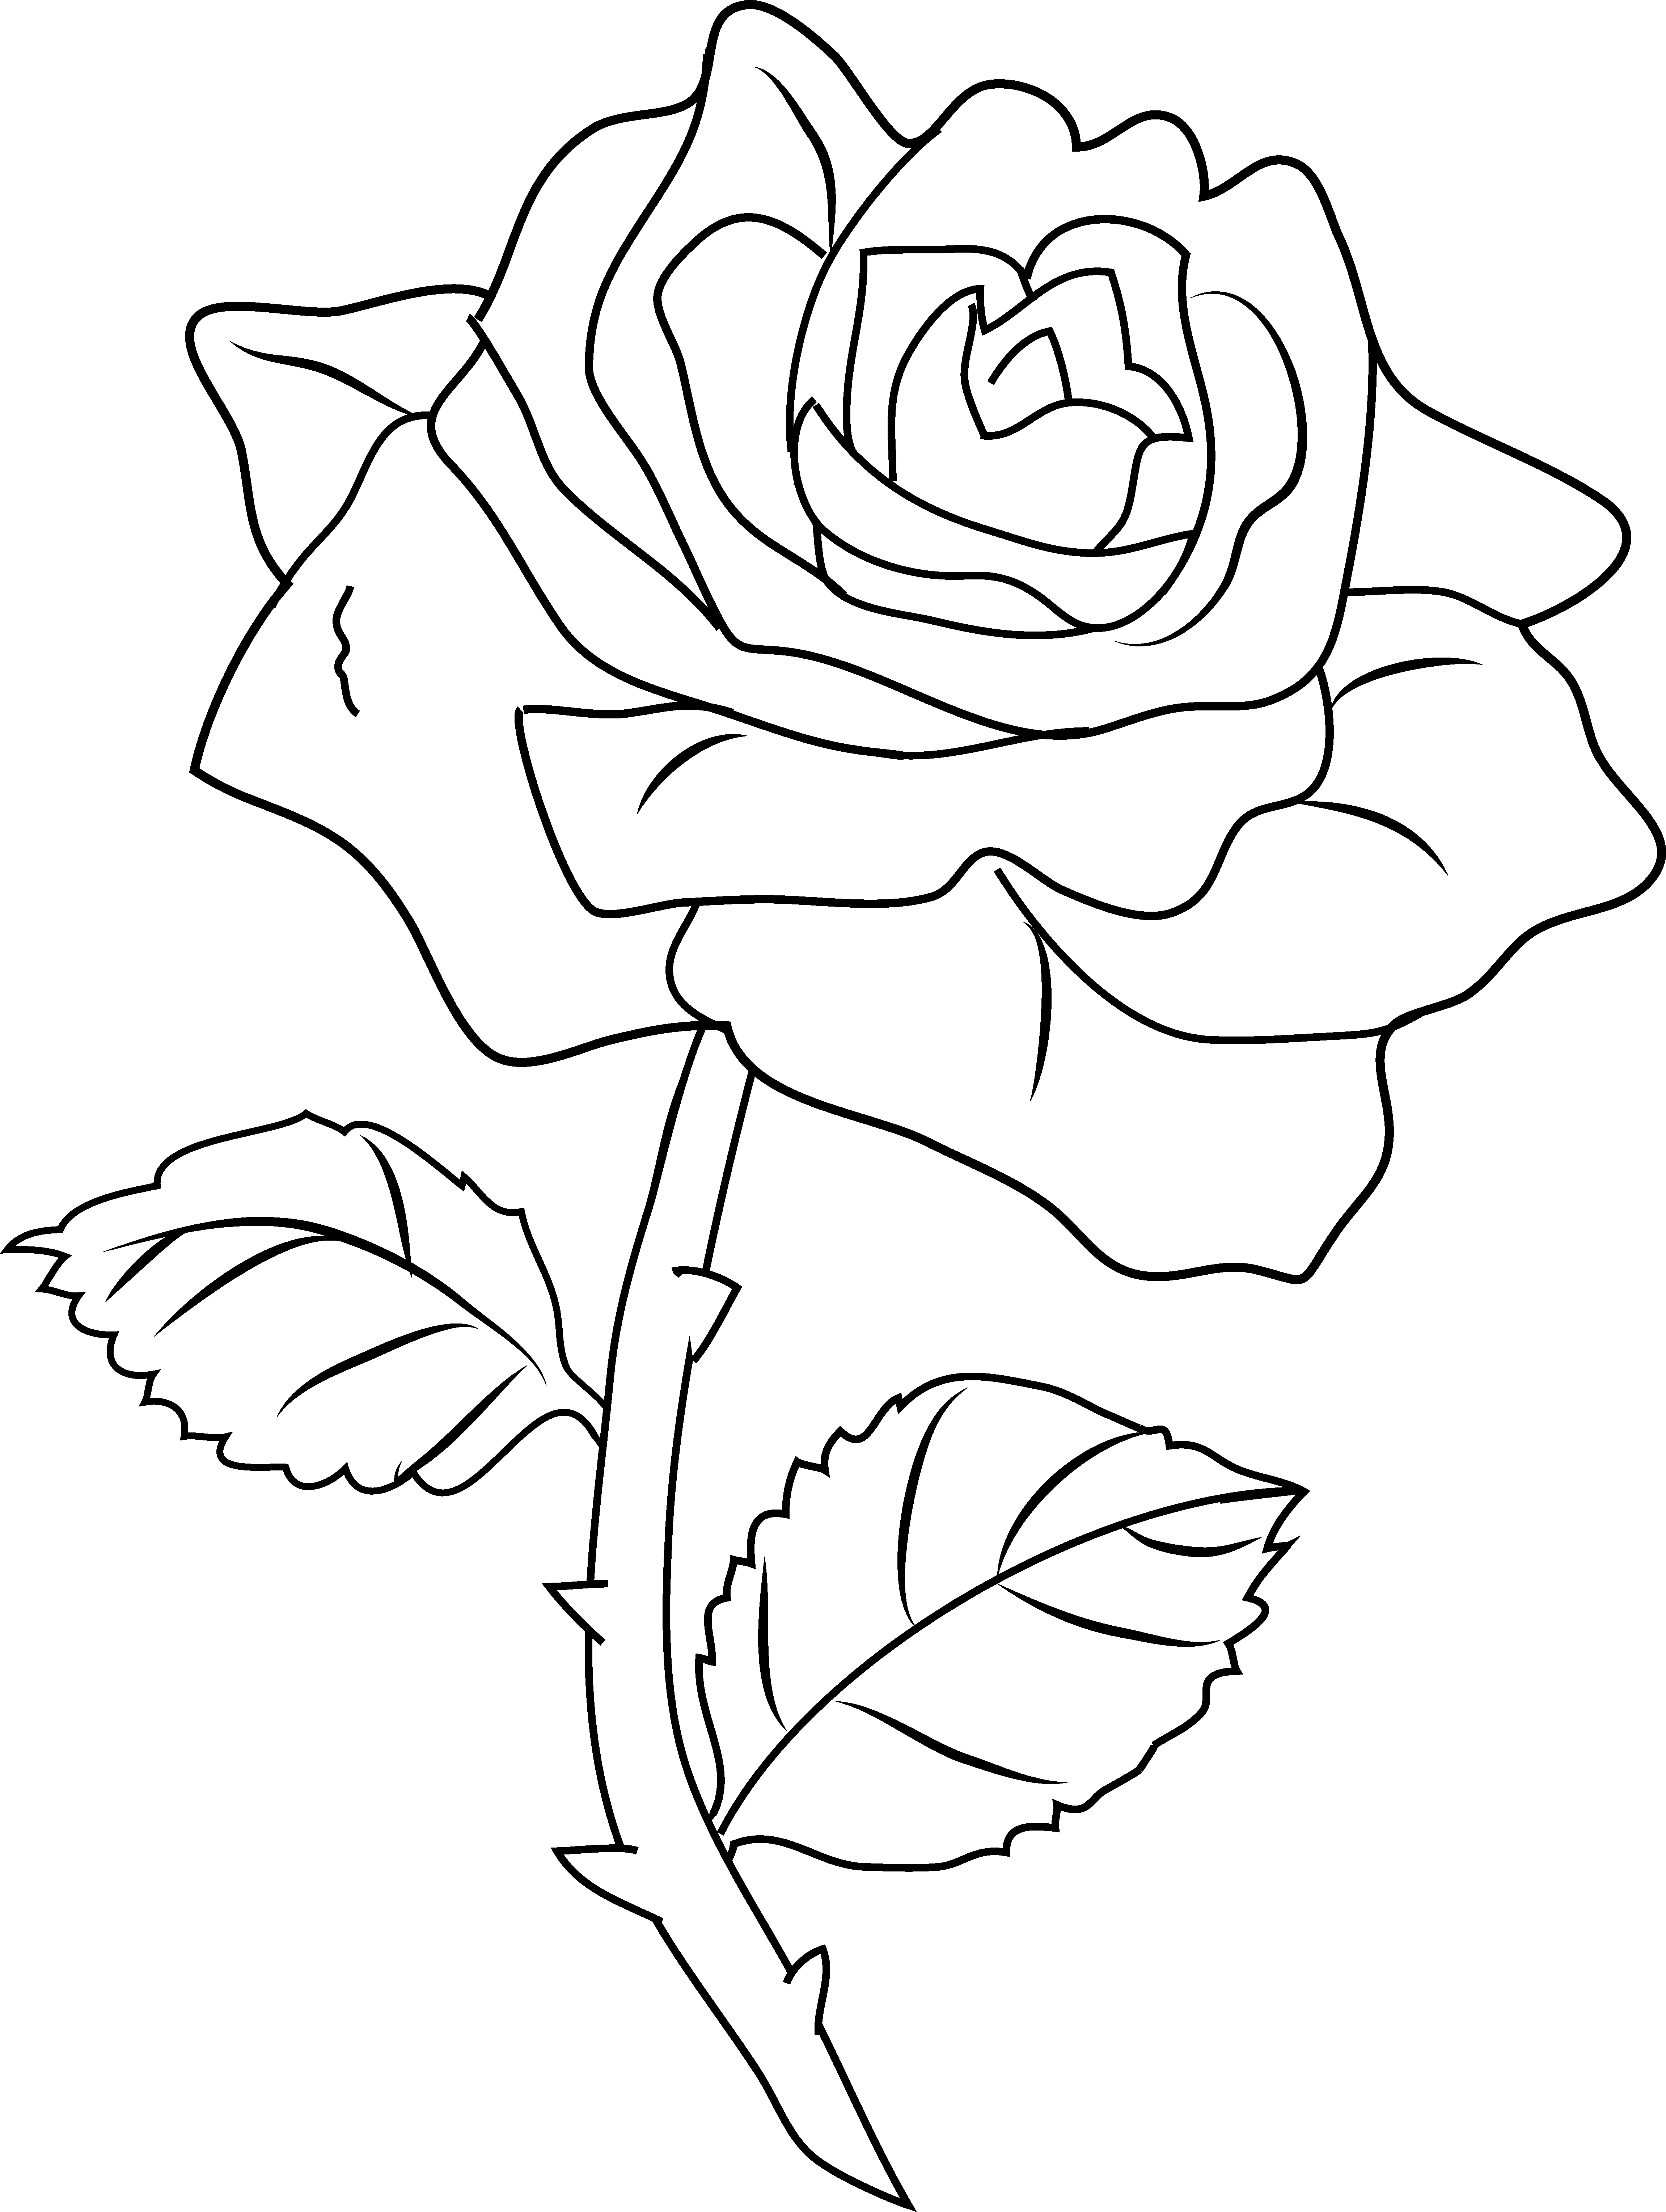 Rose color clipart - Clipground